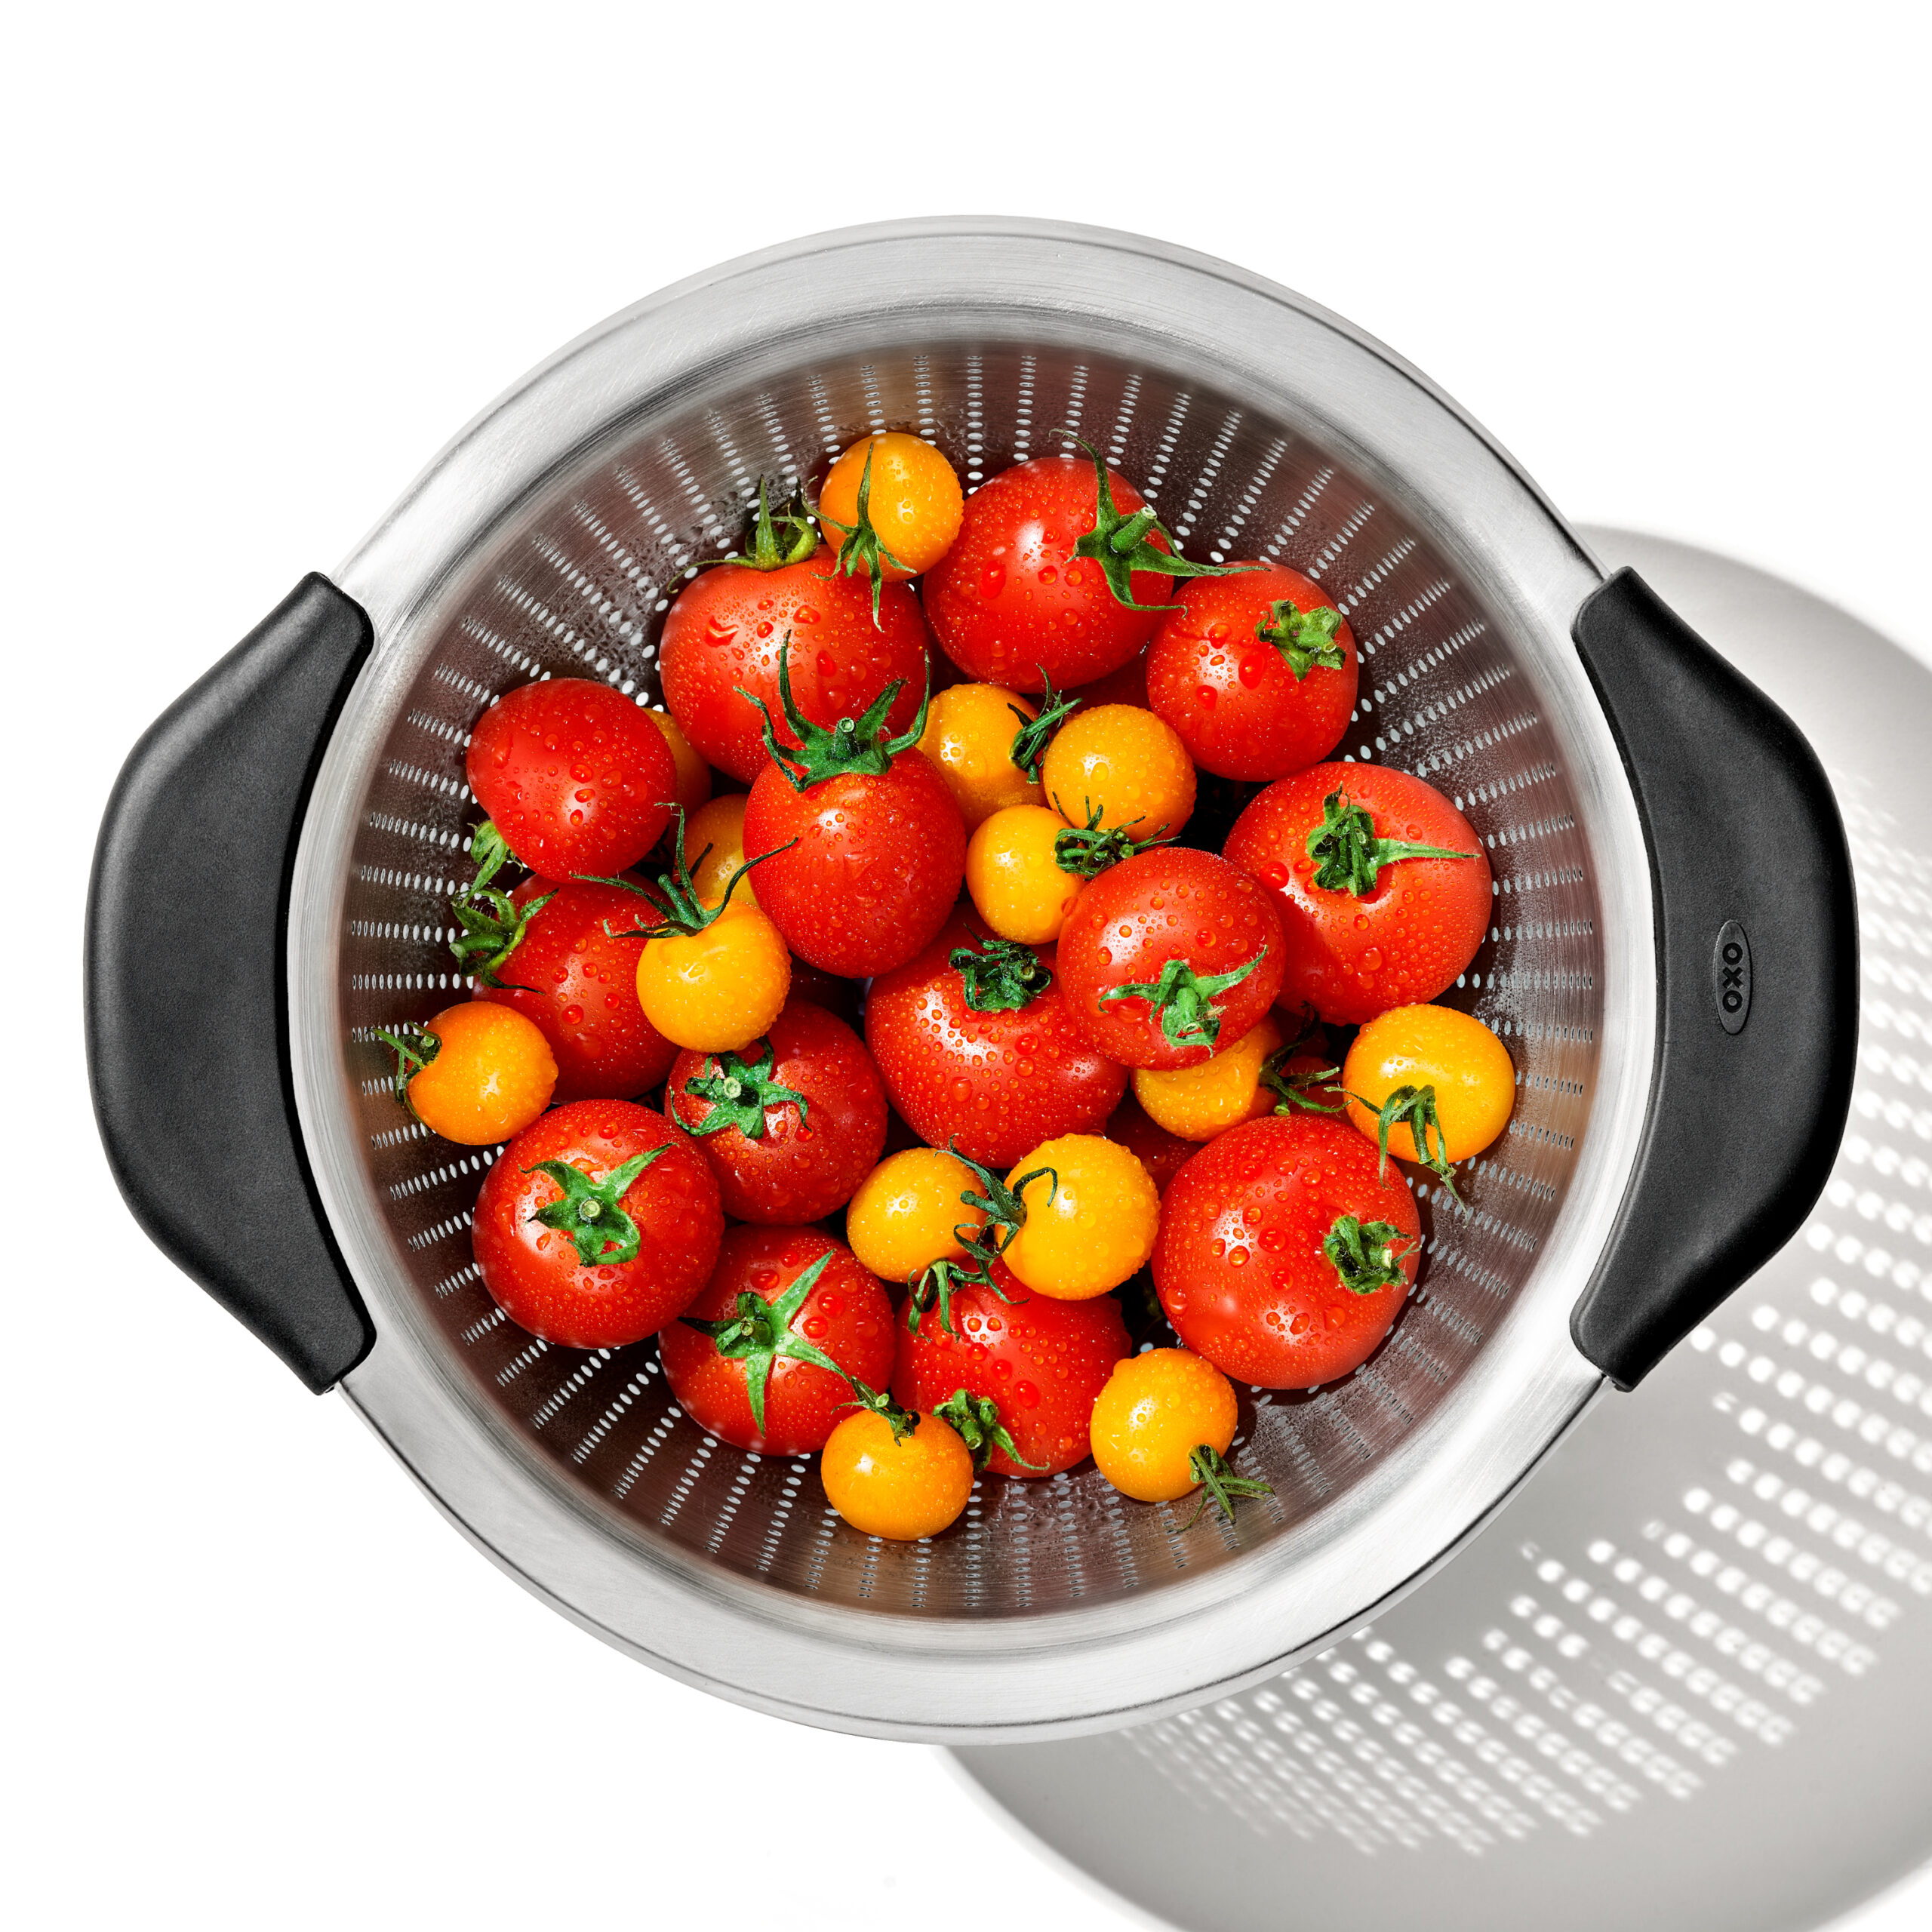 https://www.oxouk.com/wp-content/uploads/GG_11330800_StainlessSteelColander3qt_PDP_02-scaled.jpg